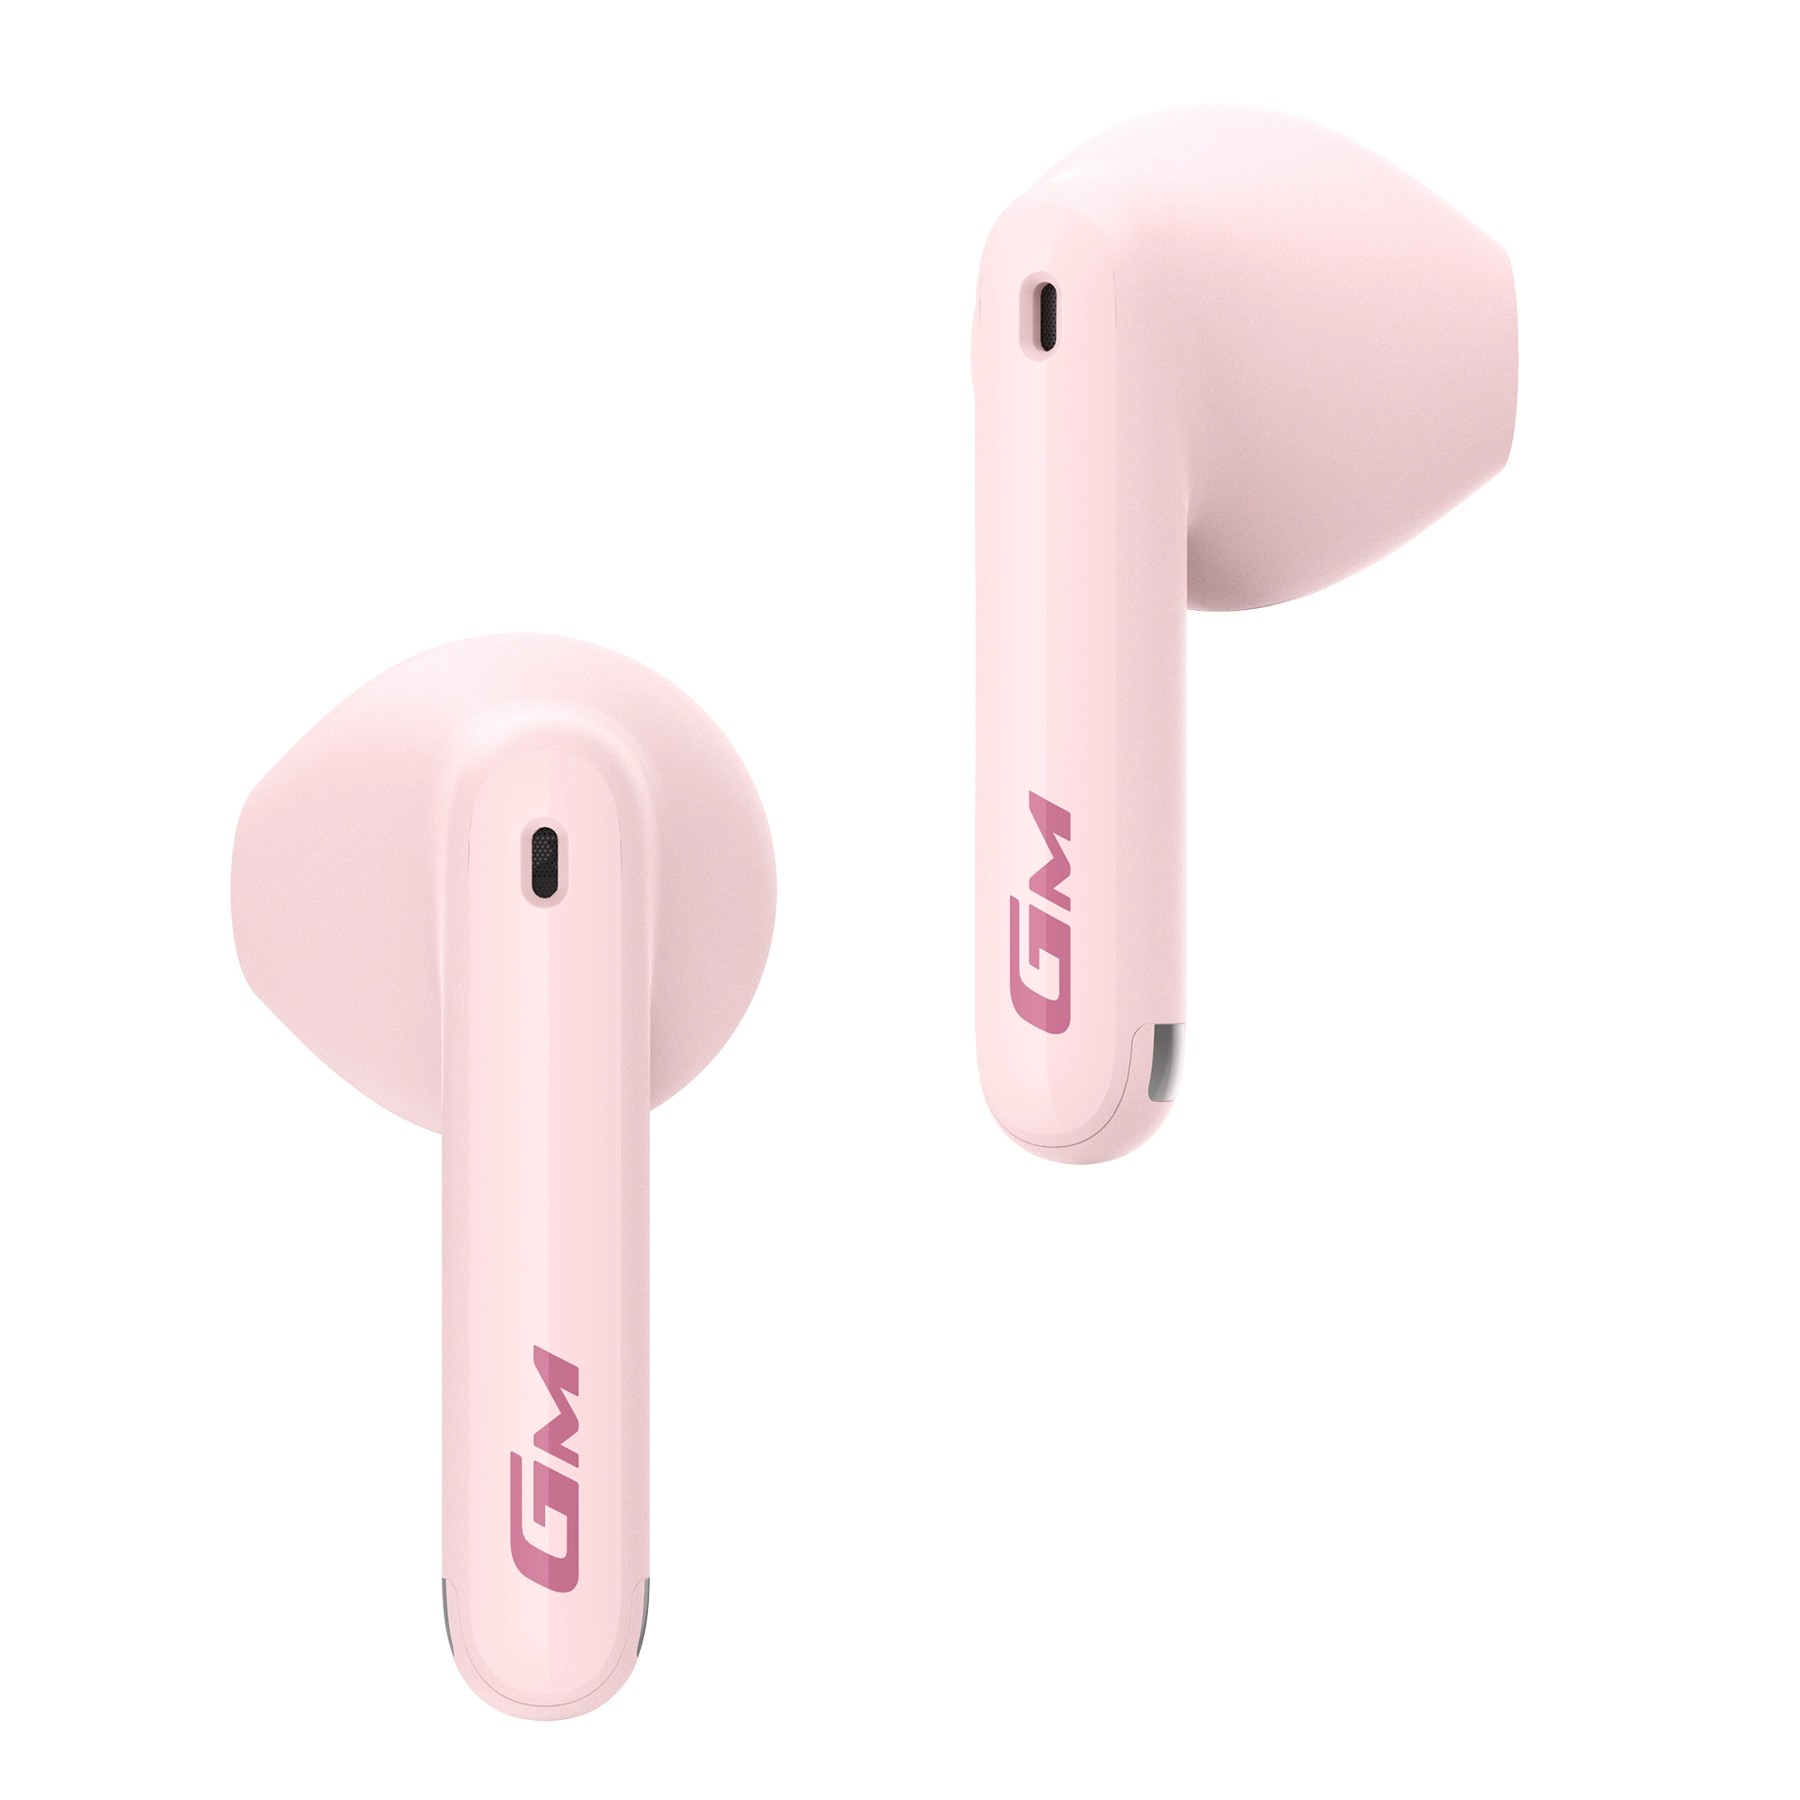 GM3 Plus Wireless Earbuds Product Pictures pink_2